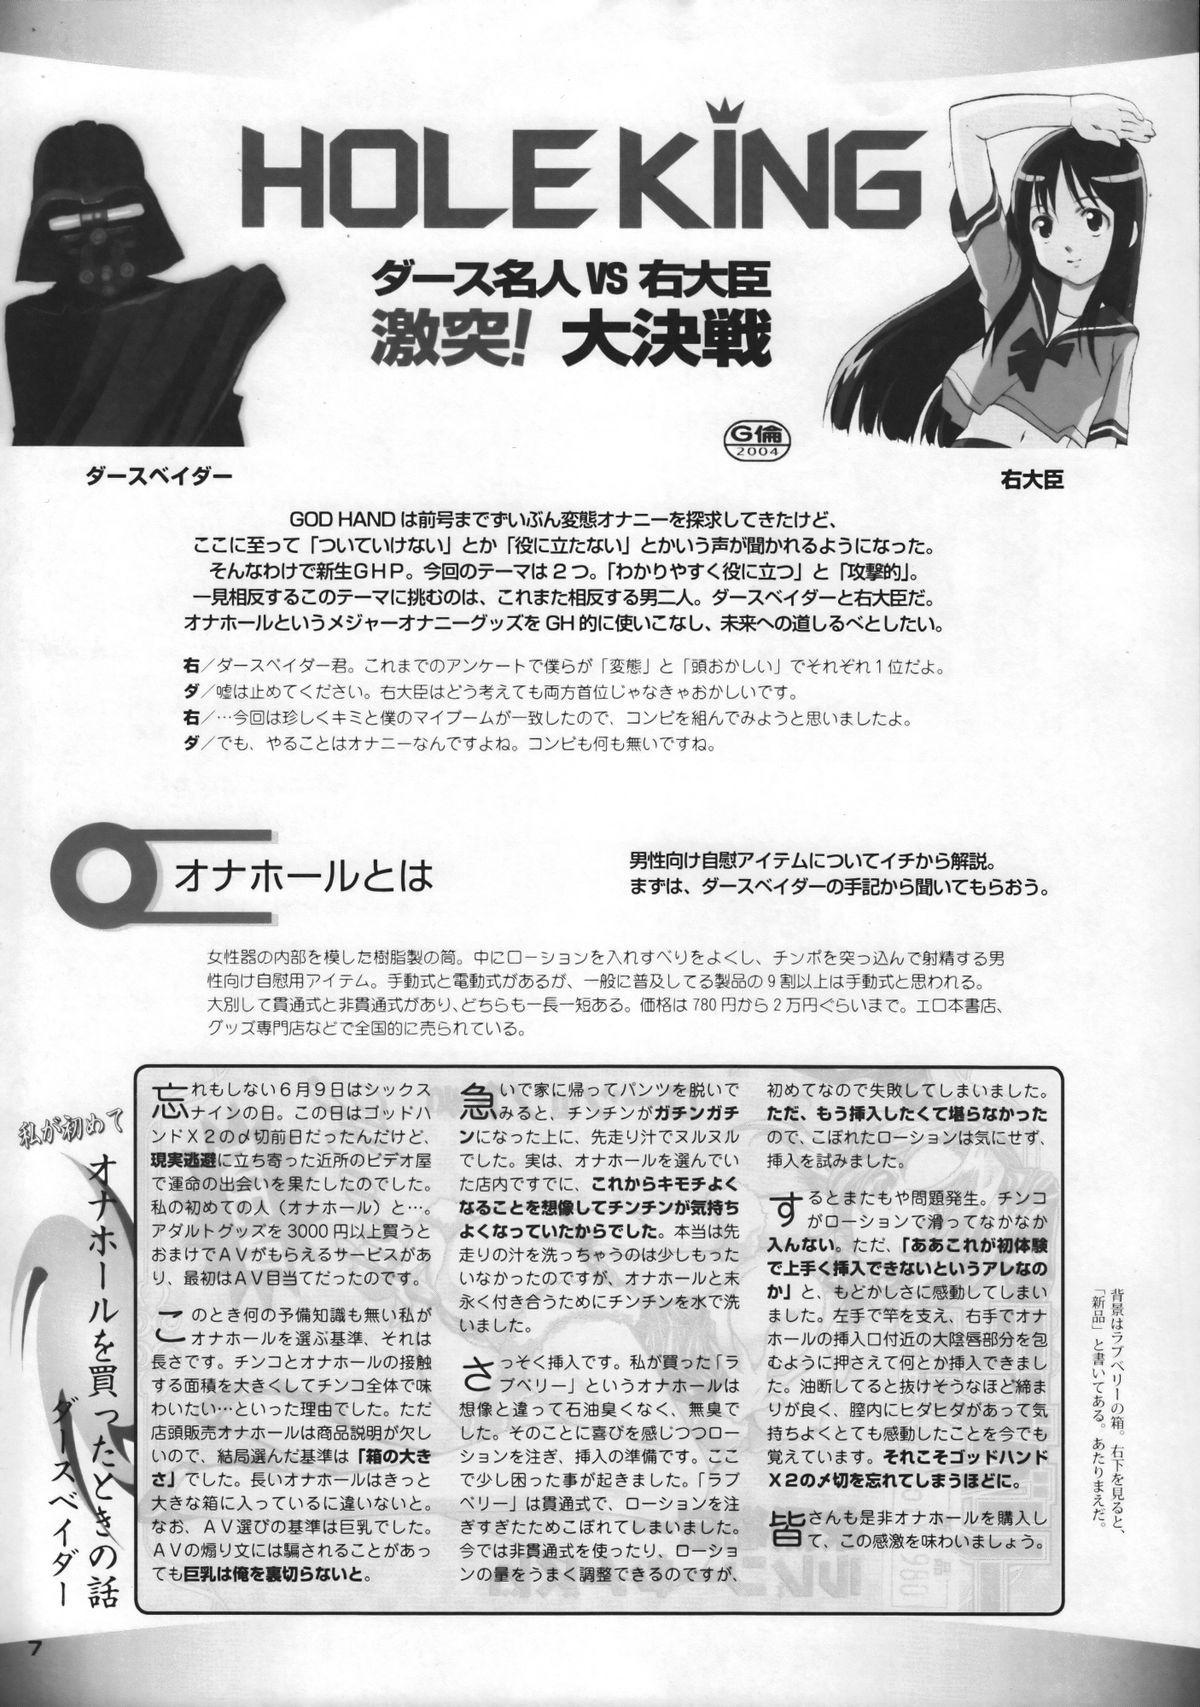 Adult Toys God Hand Press 13 Kaime - Read or die Oldvsyoung - Page 6